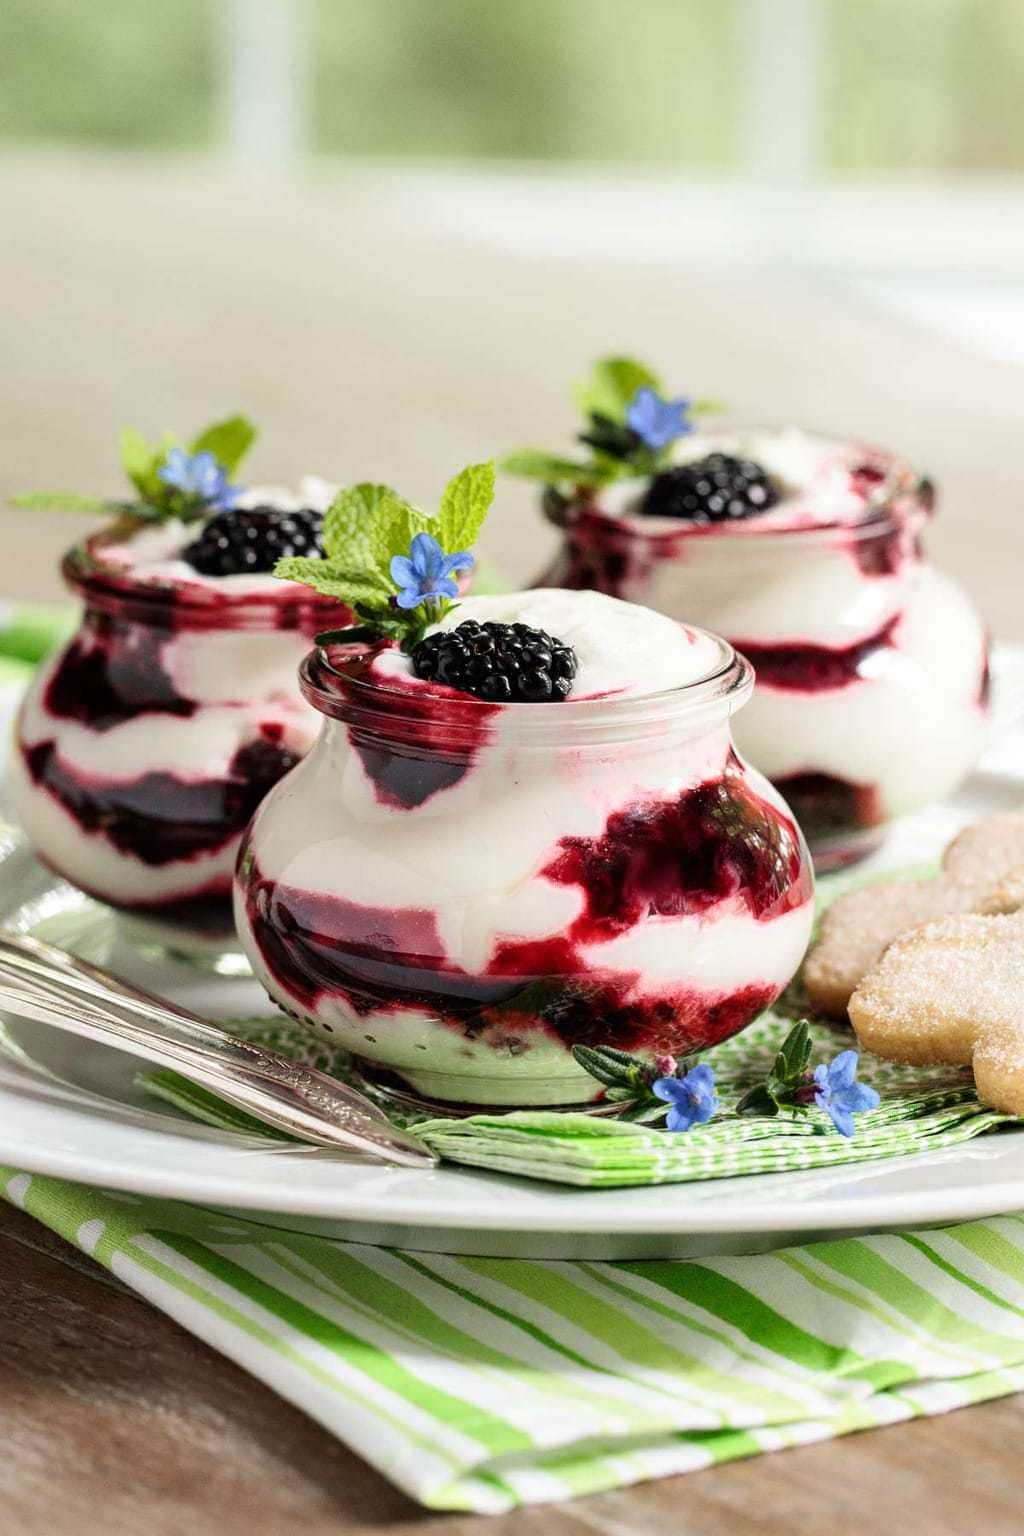 Vertical photo of an easy Irish Blackberry Fool in small glass jars garnished with fresh mint leaves, blackberries and small blue flowers.